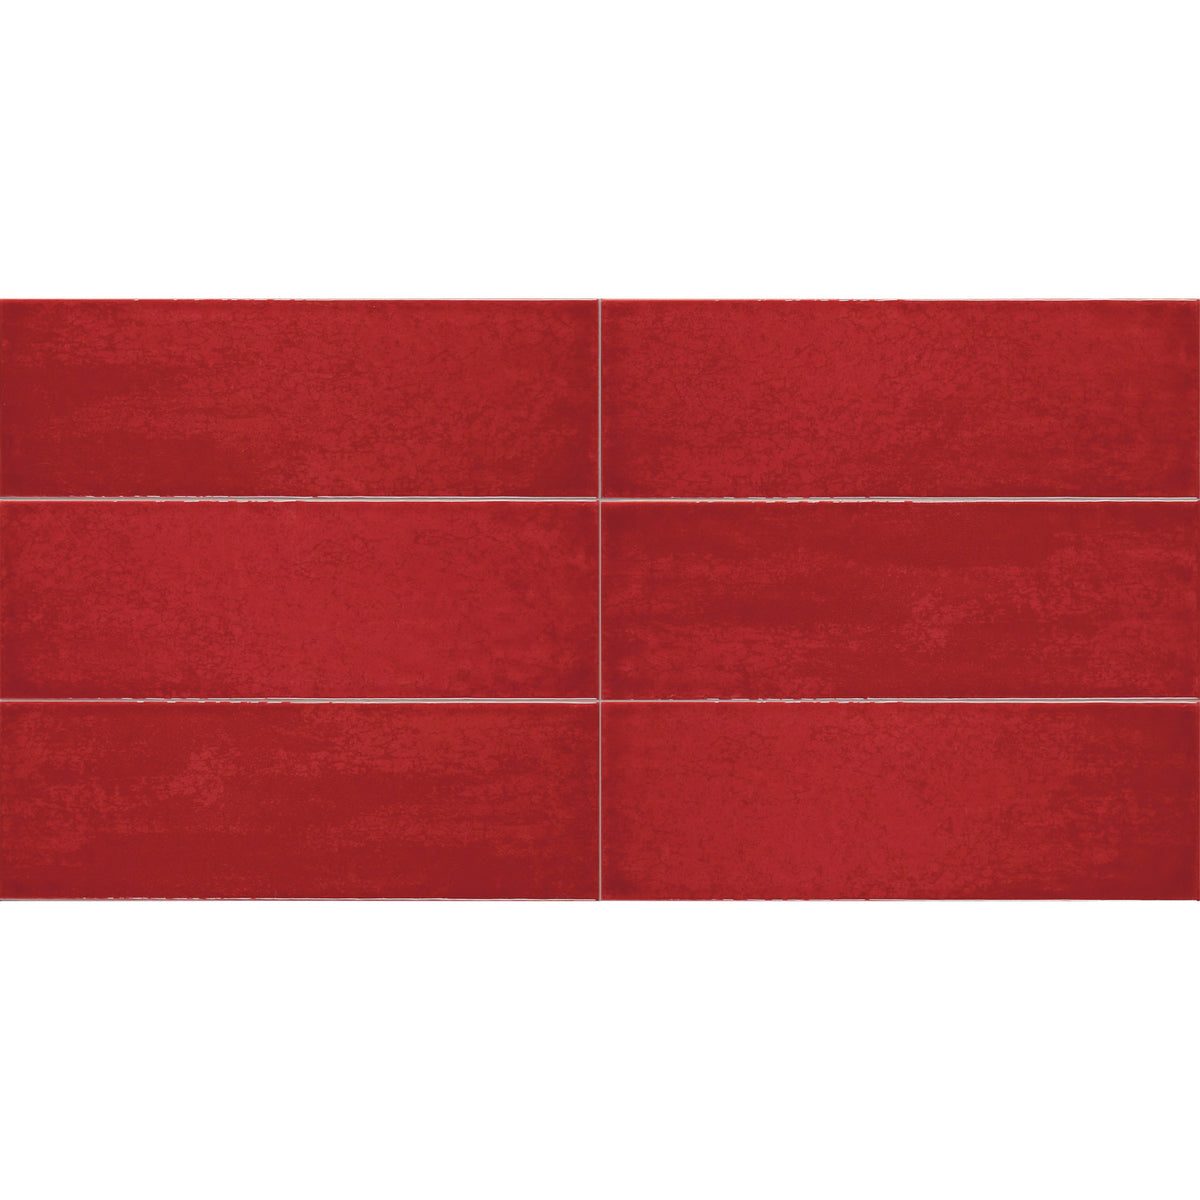 Tesoro - Maiolica 4 in. x 12 in. Ceramic Wall Tile - Rosso Installed